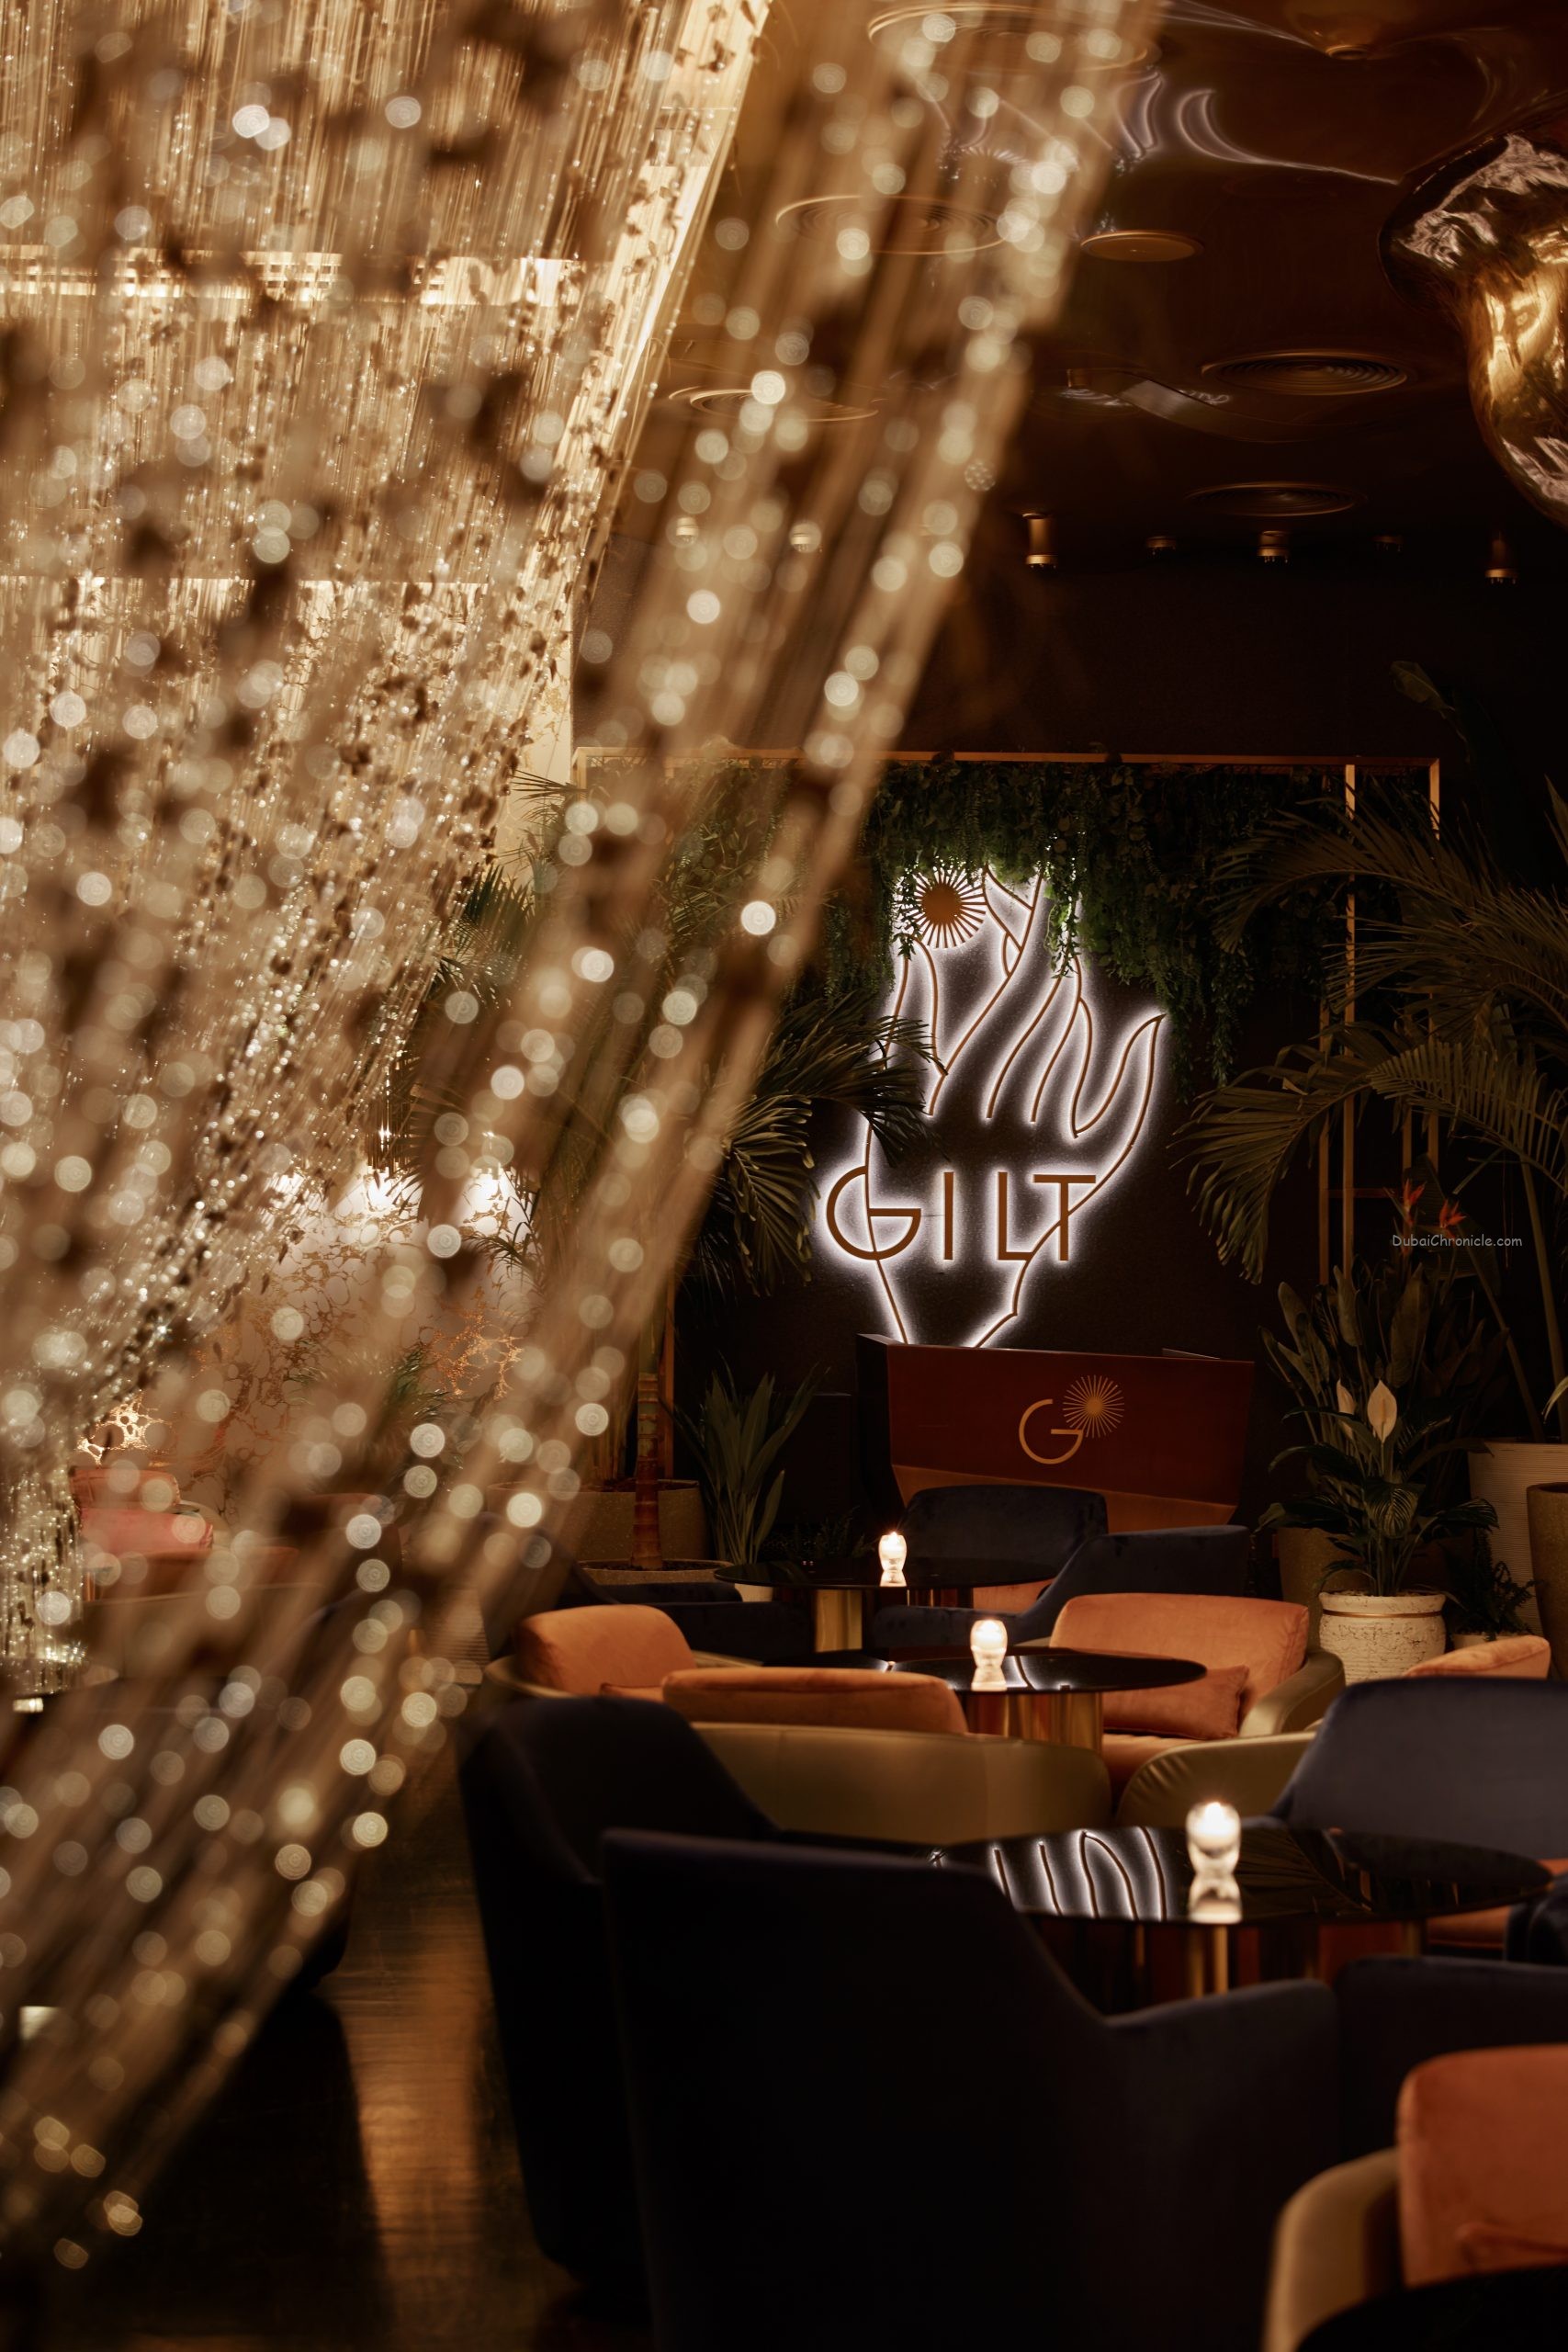 Gilt continues to elevate its dedication to the craft of mixology by bringing Vasilis Kyritis for a memorable takeover experience.